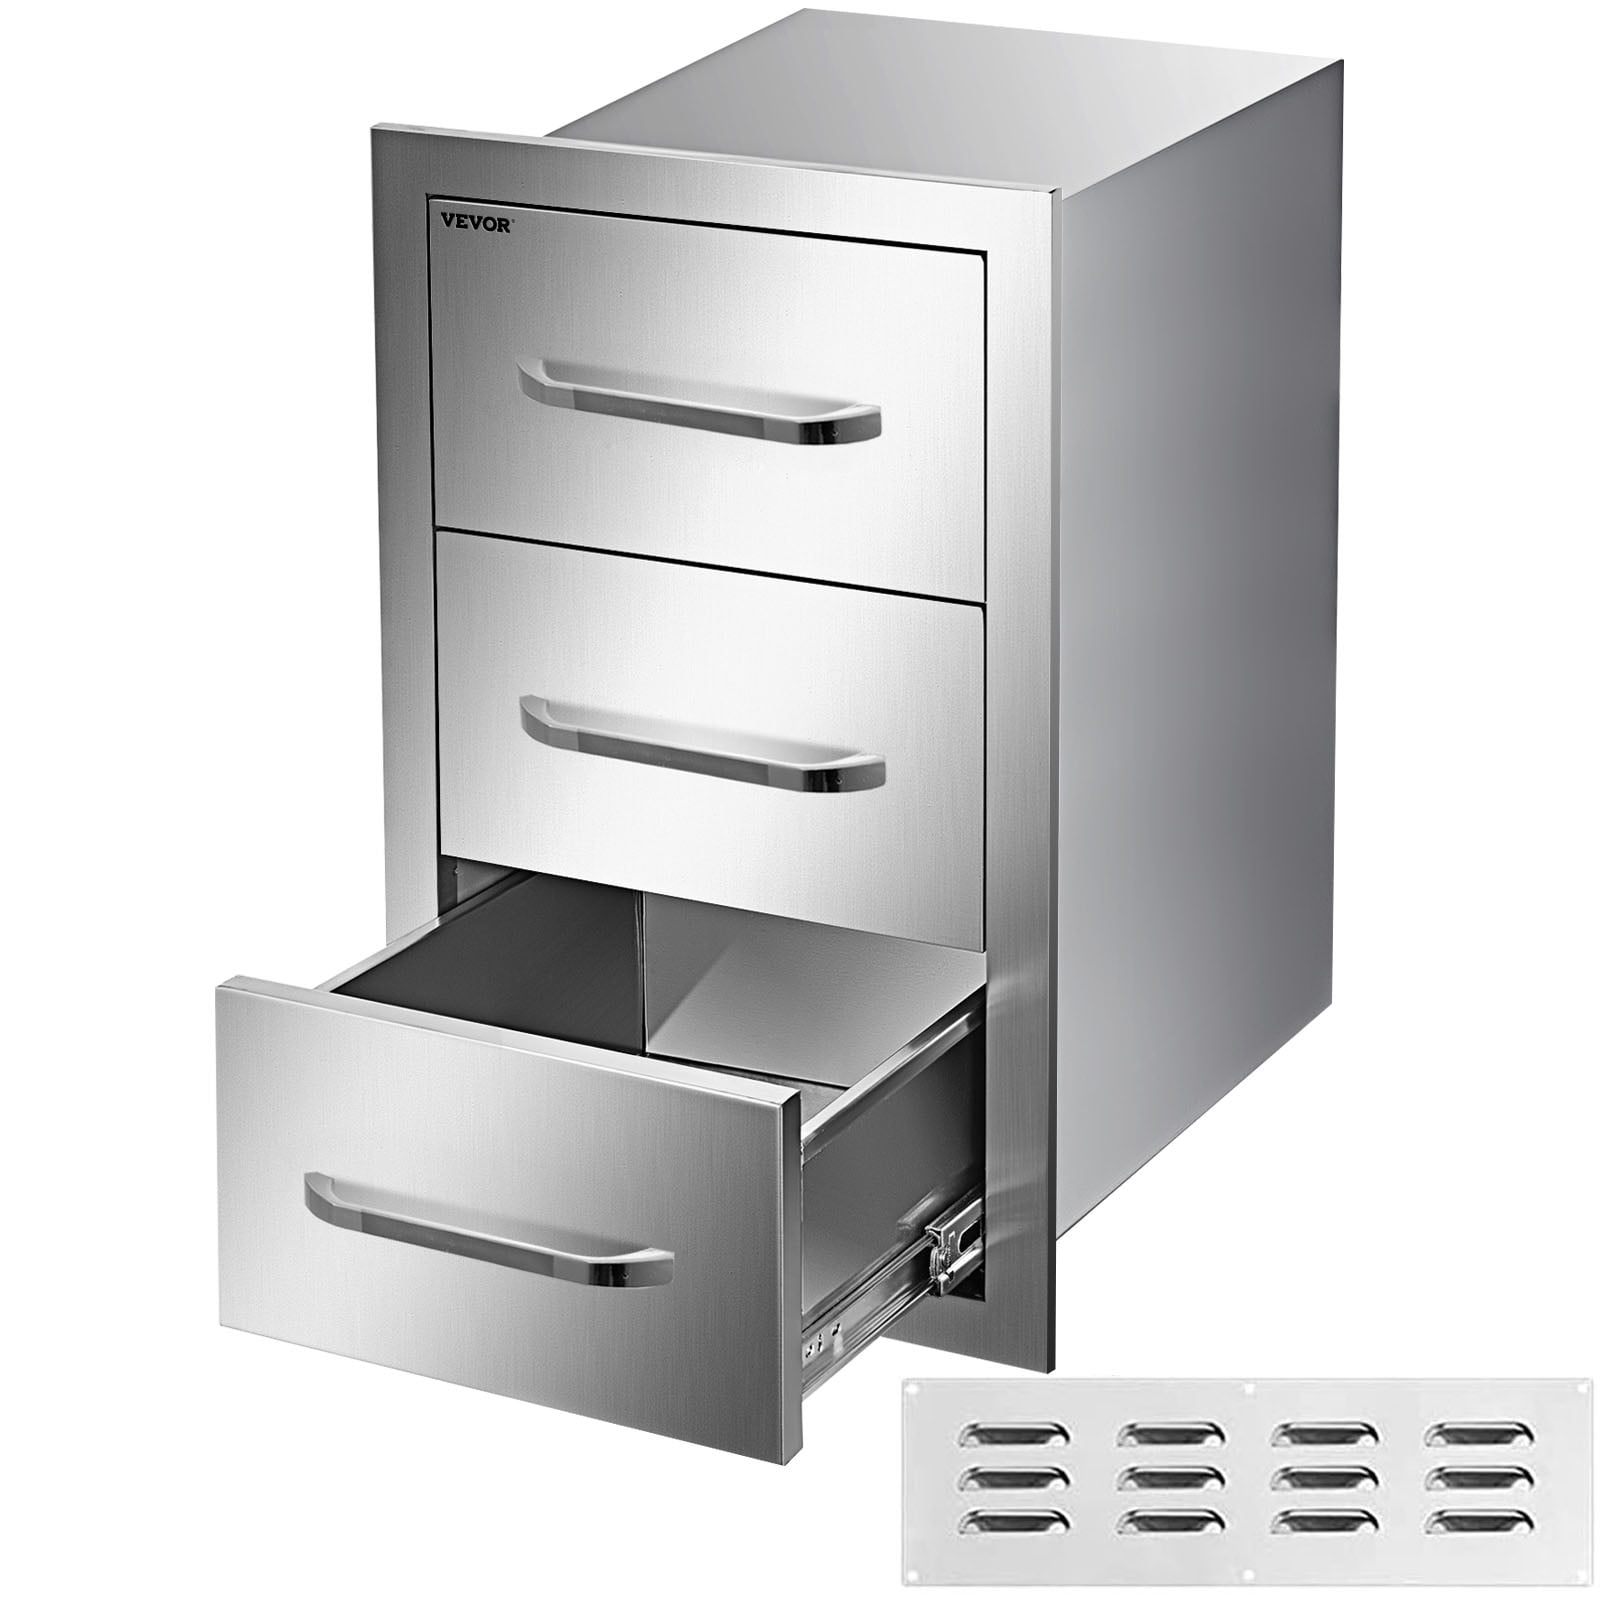 30"x17" BBQ Stainless Steel Triple Drawers Drawer Tracks Access  Outdoor Kitchen 